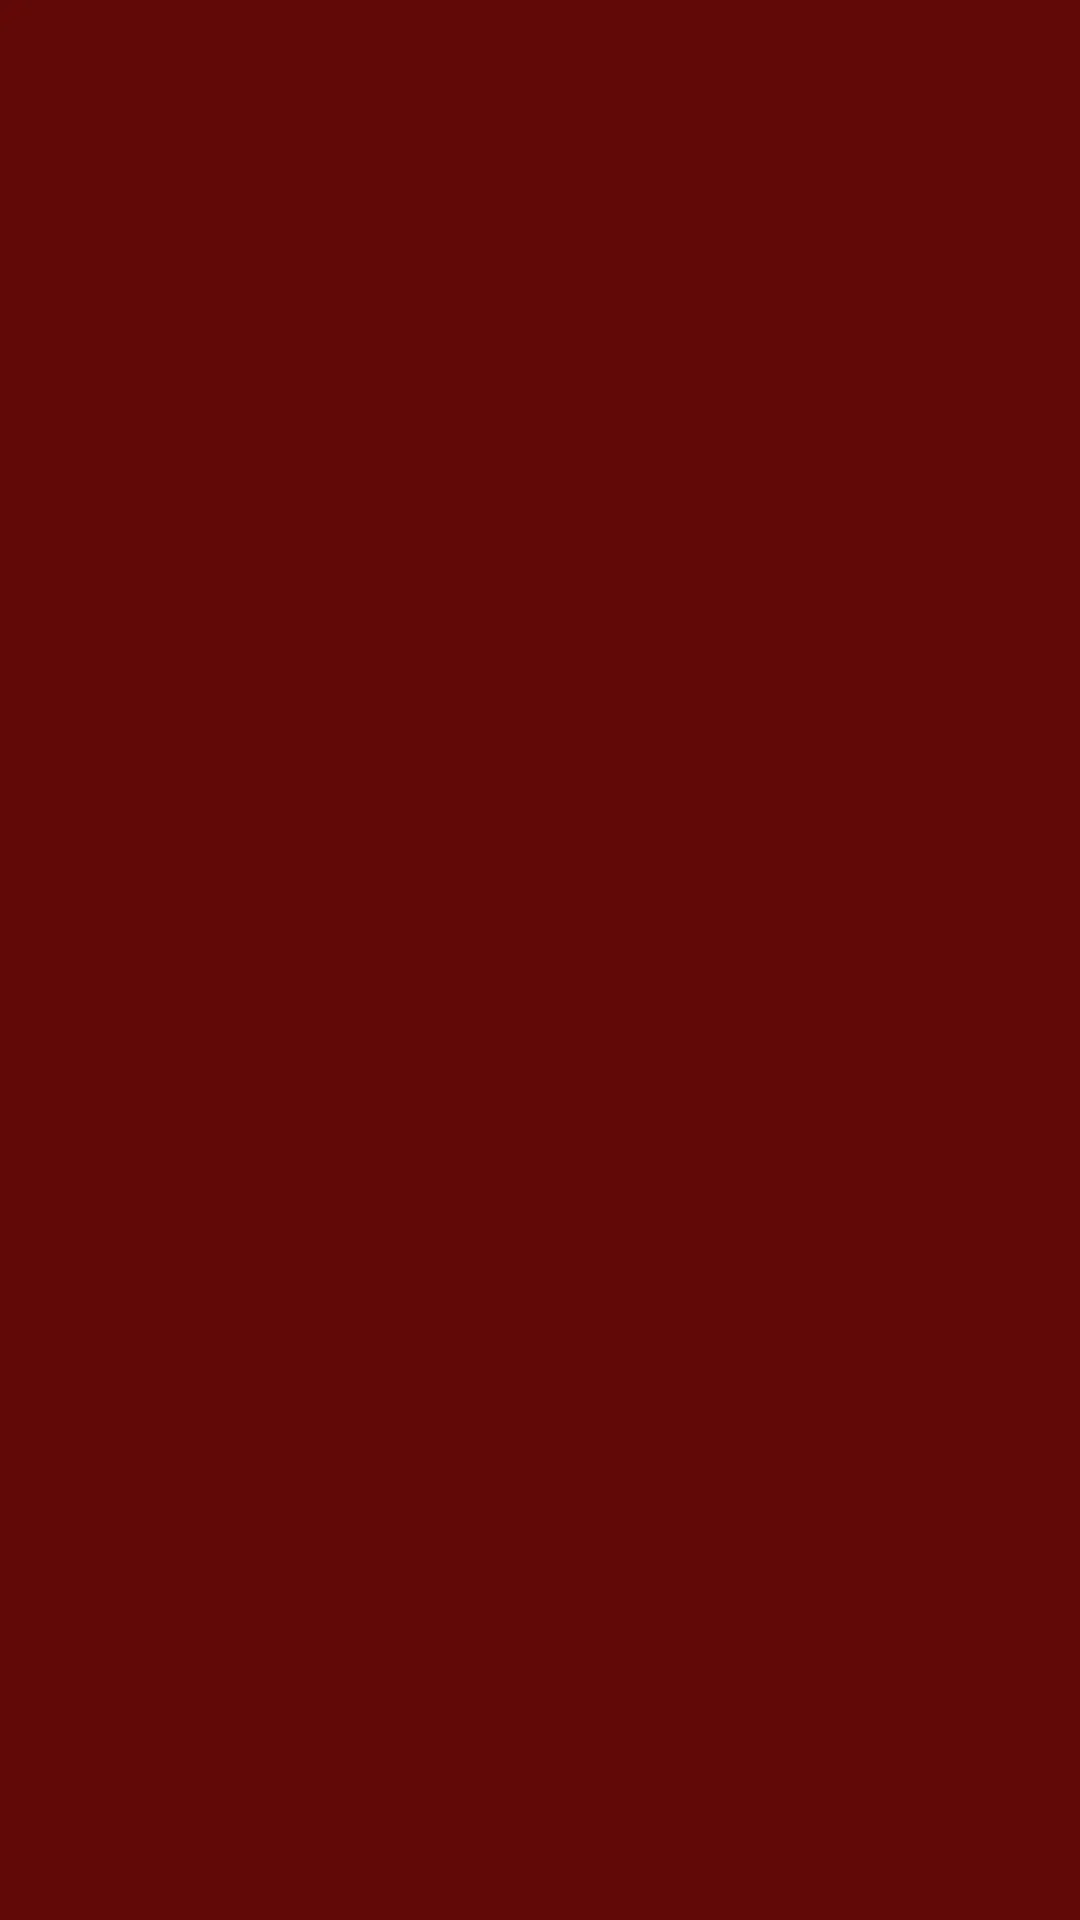 1080x1920 Dark Red Plain Wallpapers Top Free Dark Red Plain Backgrounds